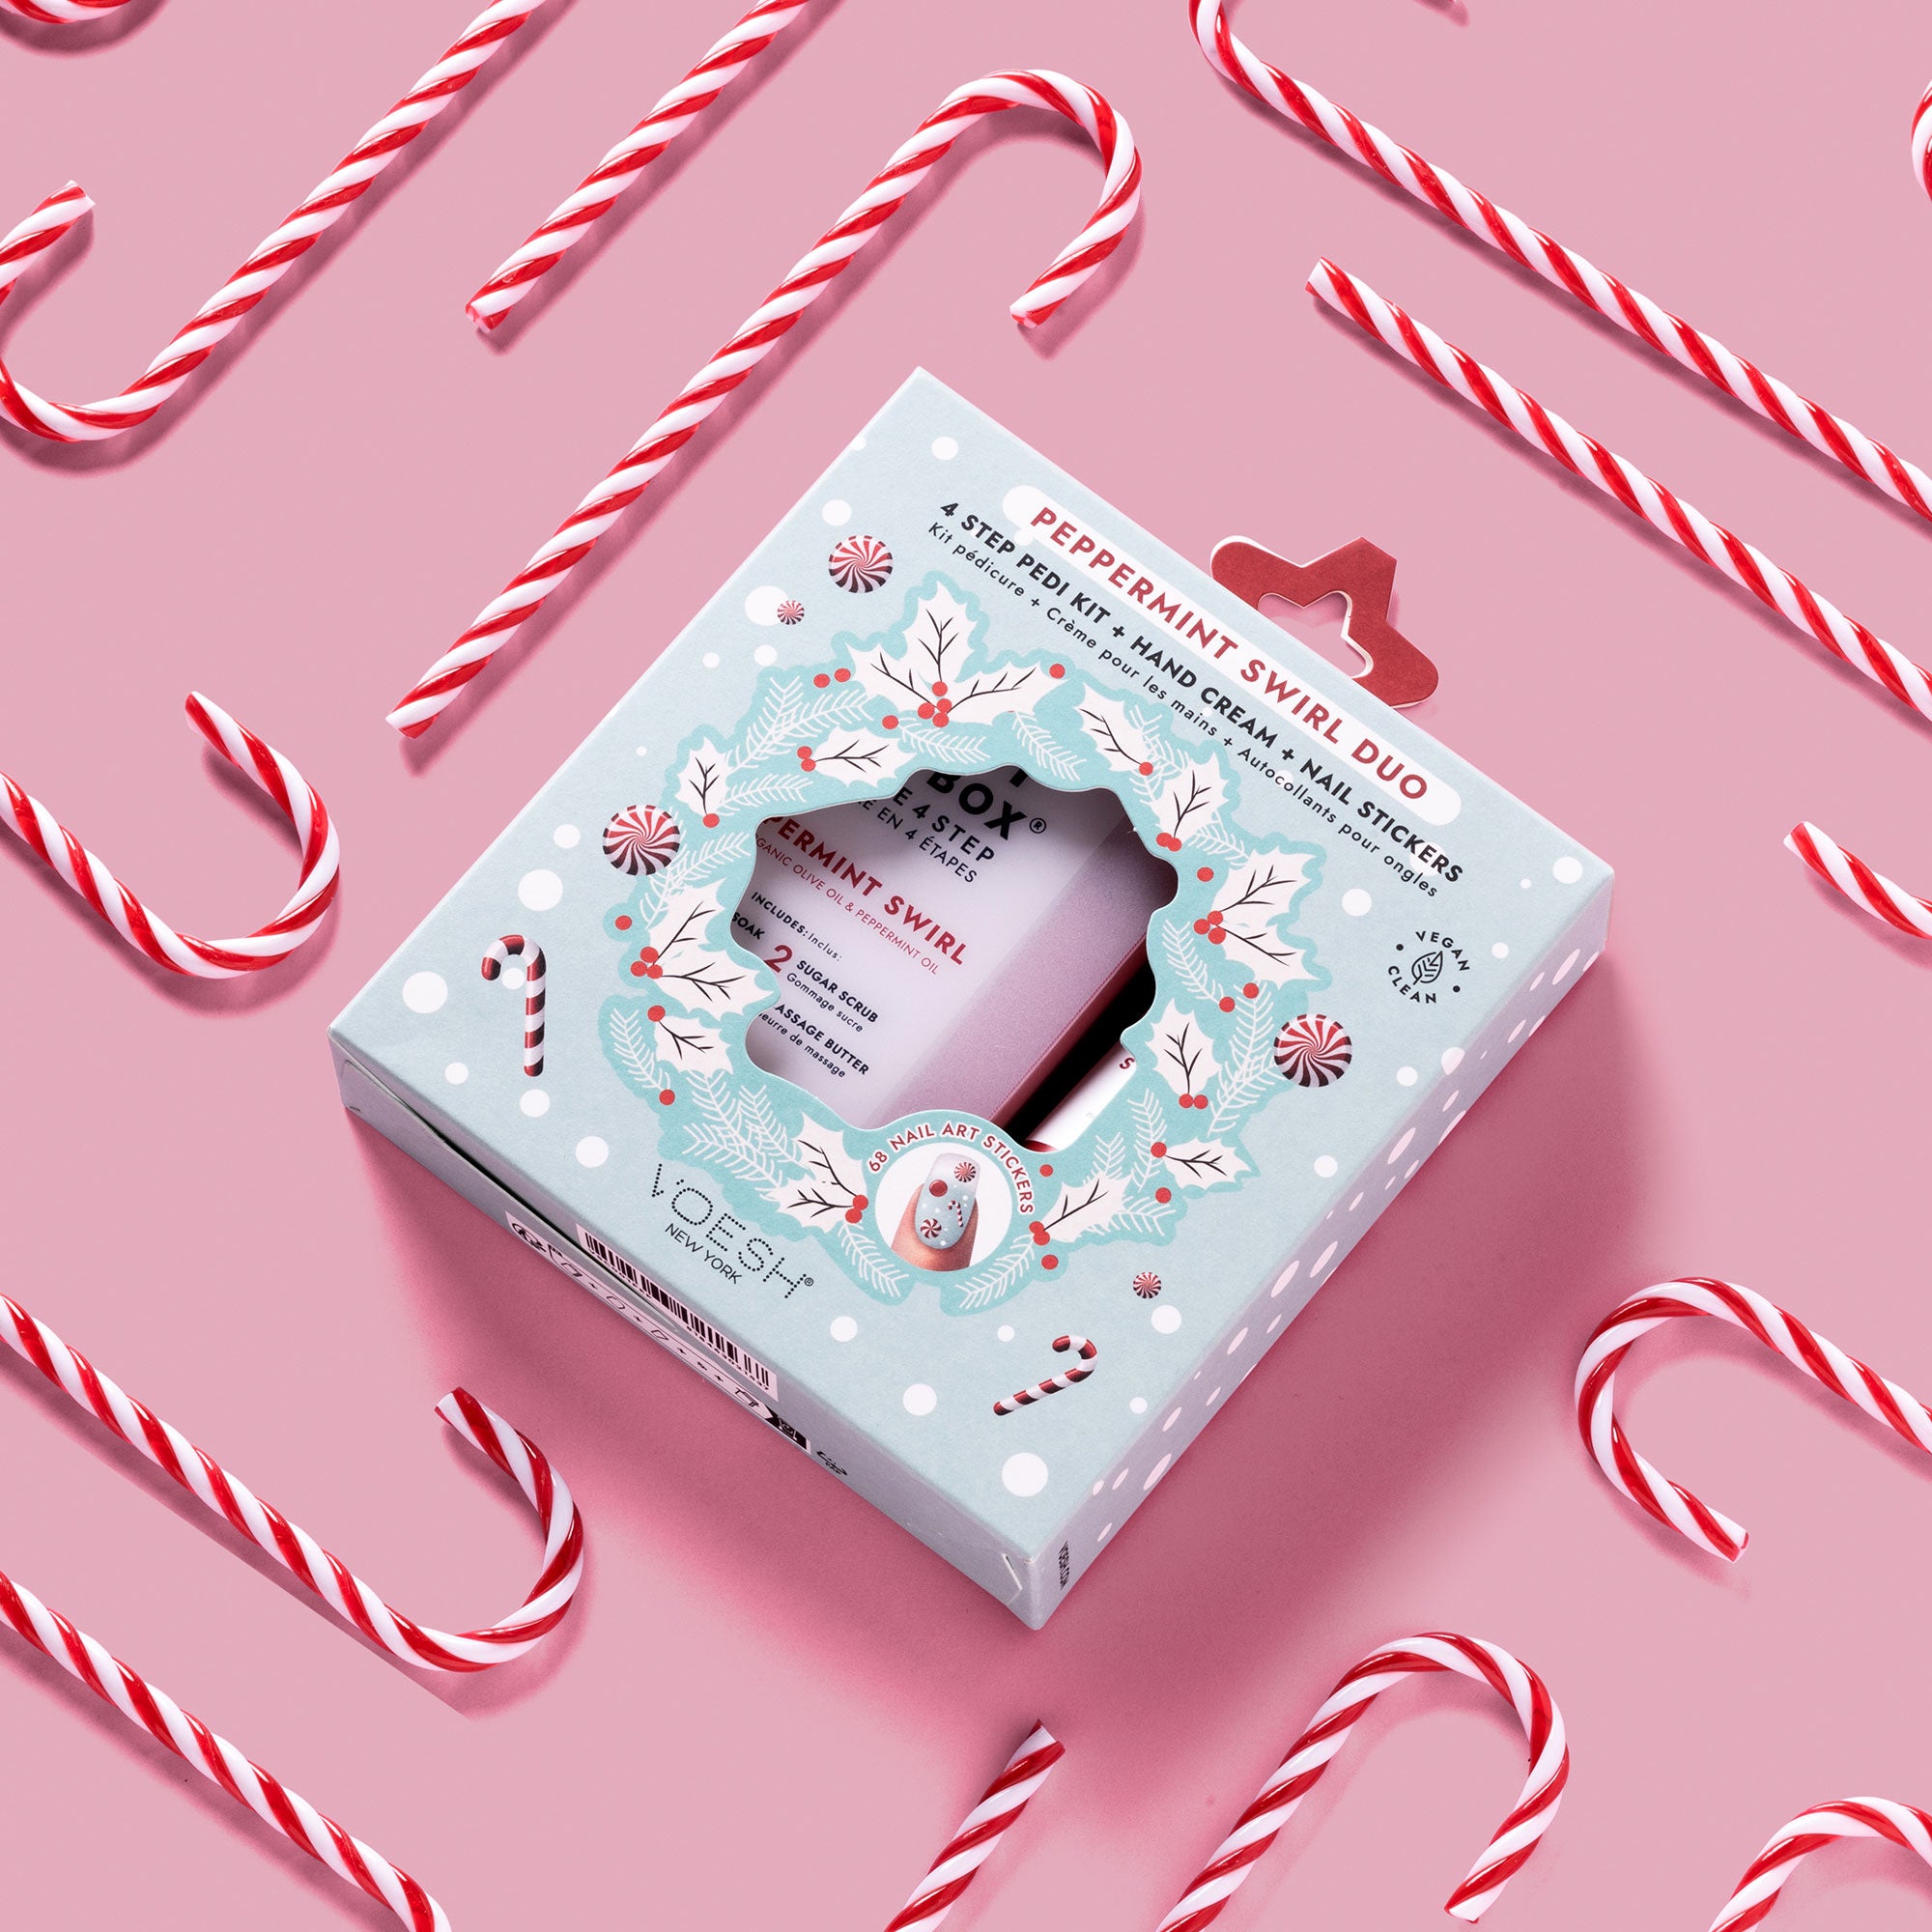 Limited Edition Peppermint Swirl Duo